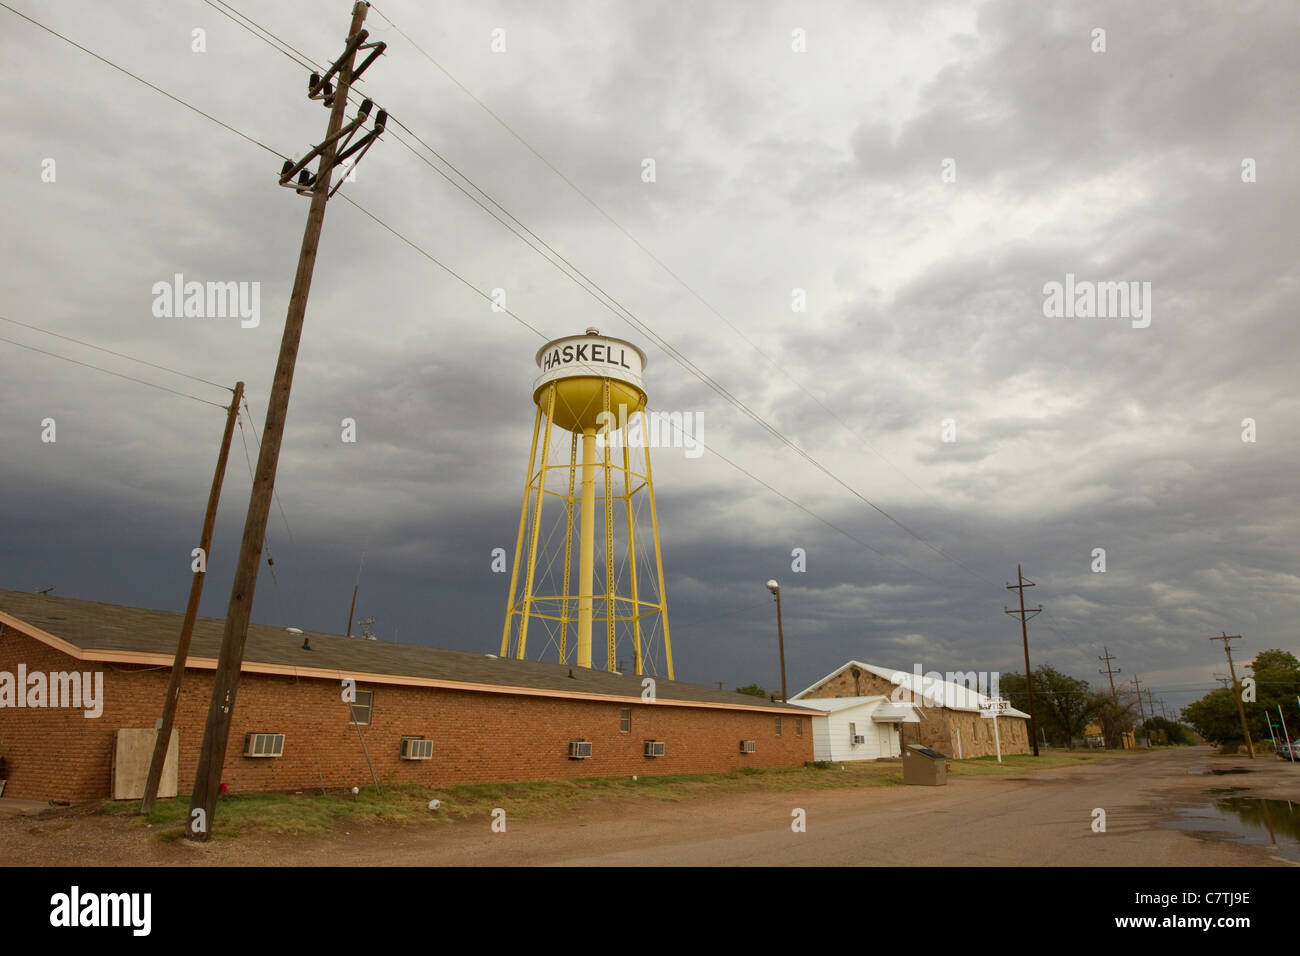 Water tower and power lines in downtown Haskell, the small north Texas town where Texas First Lady Anita Perry grew up. Stock Photo